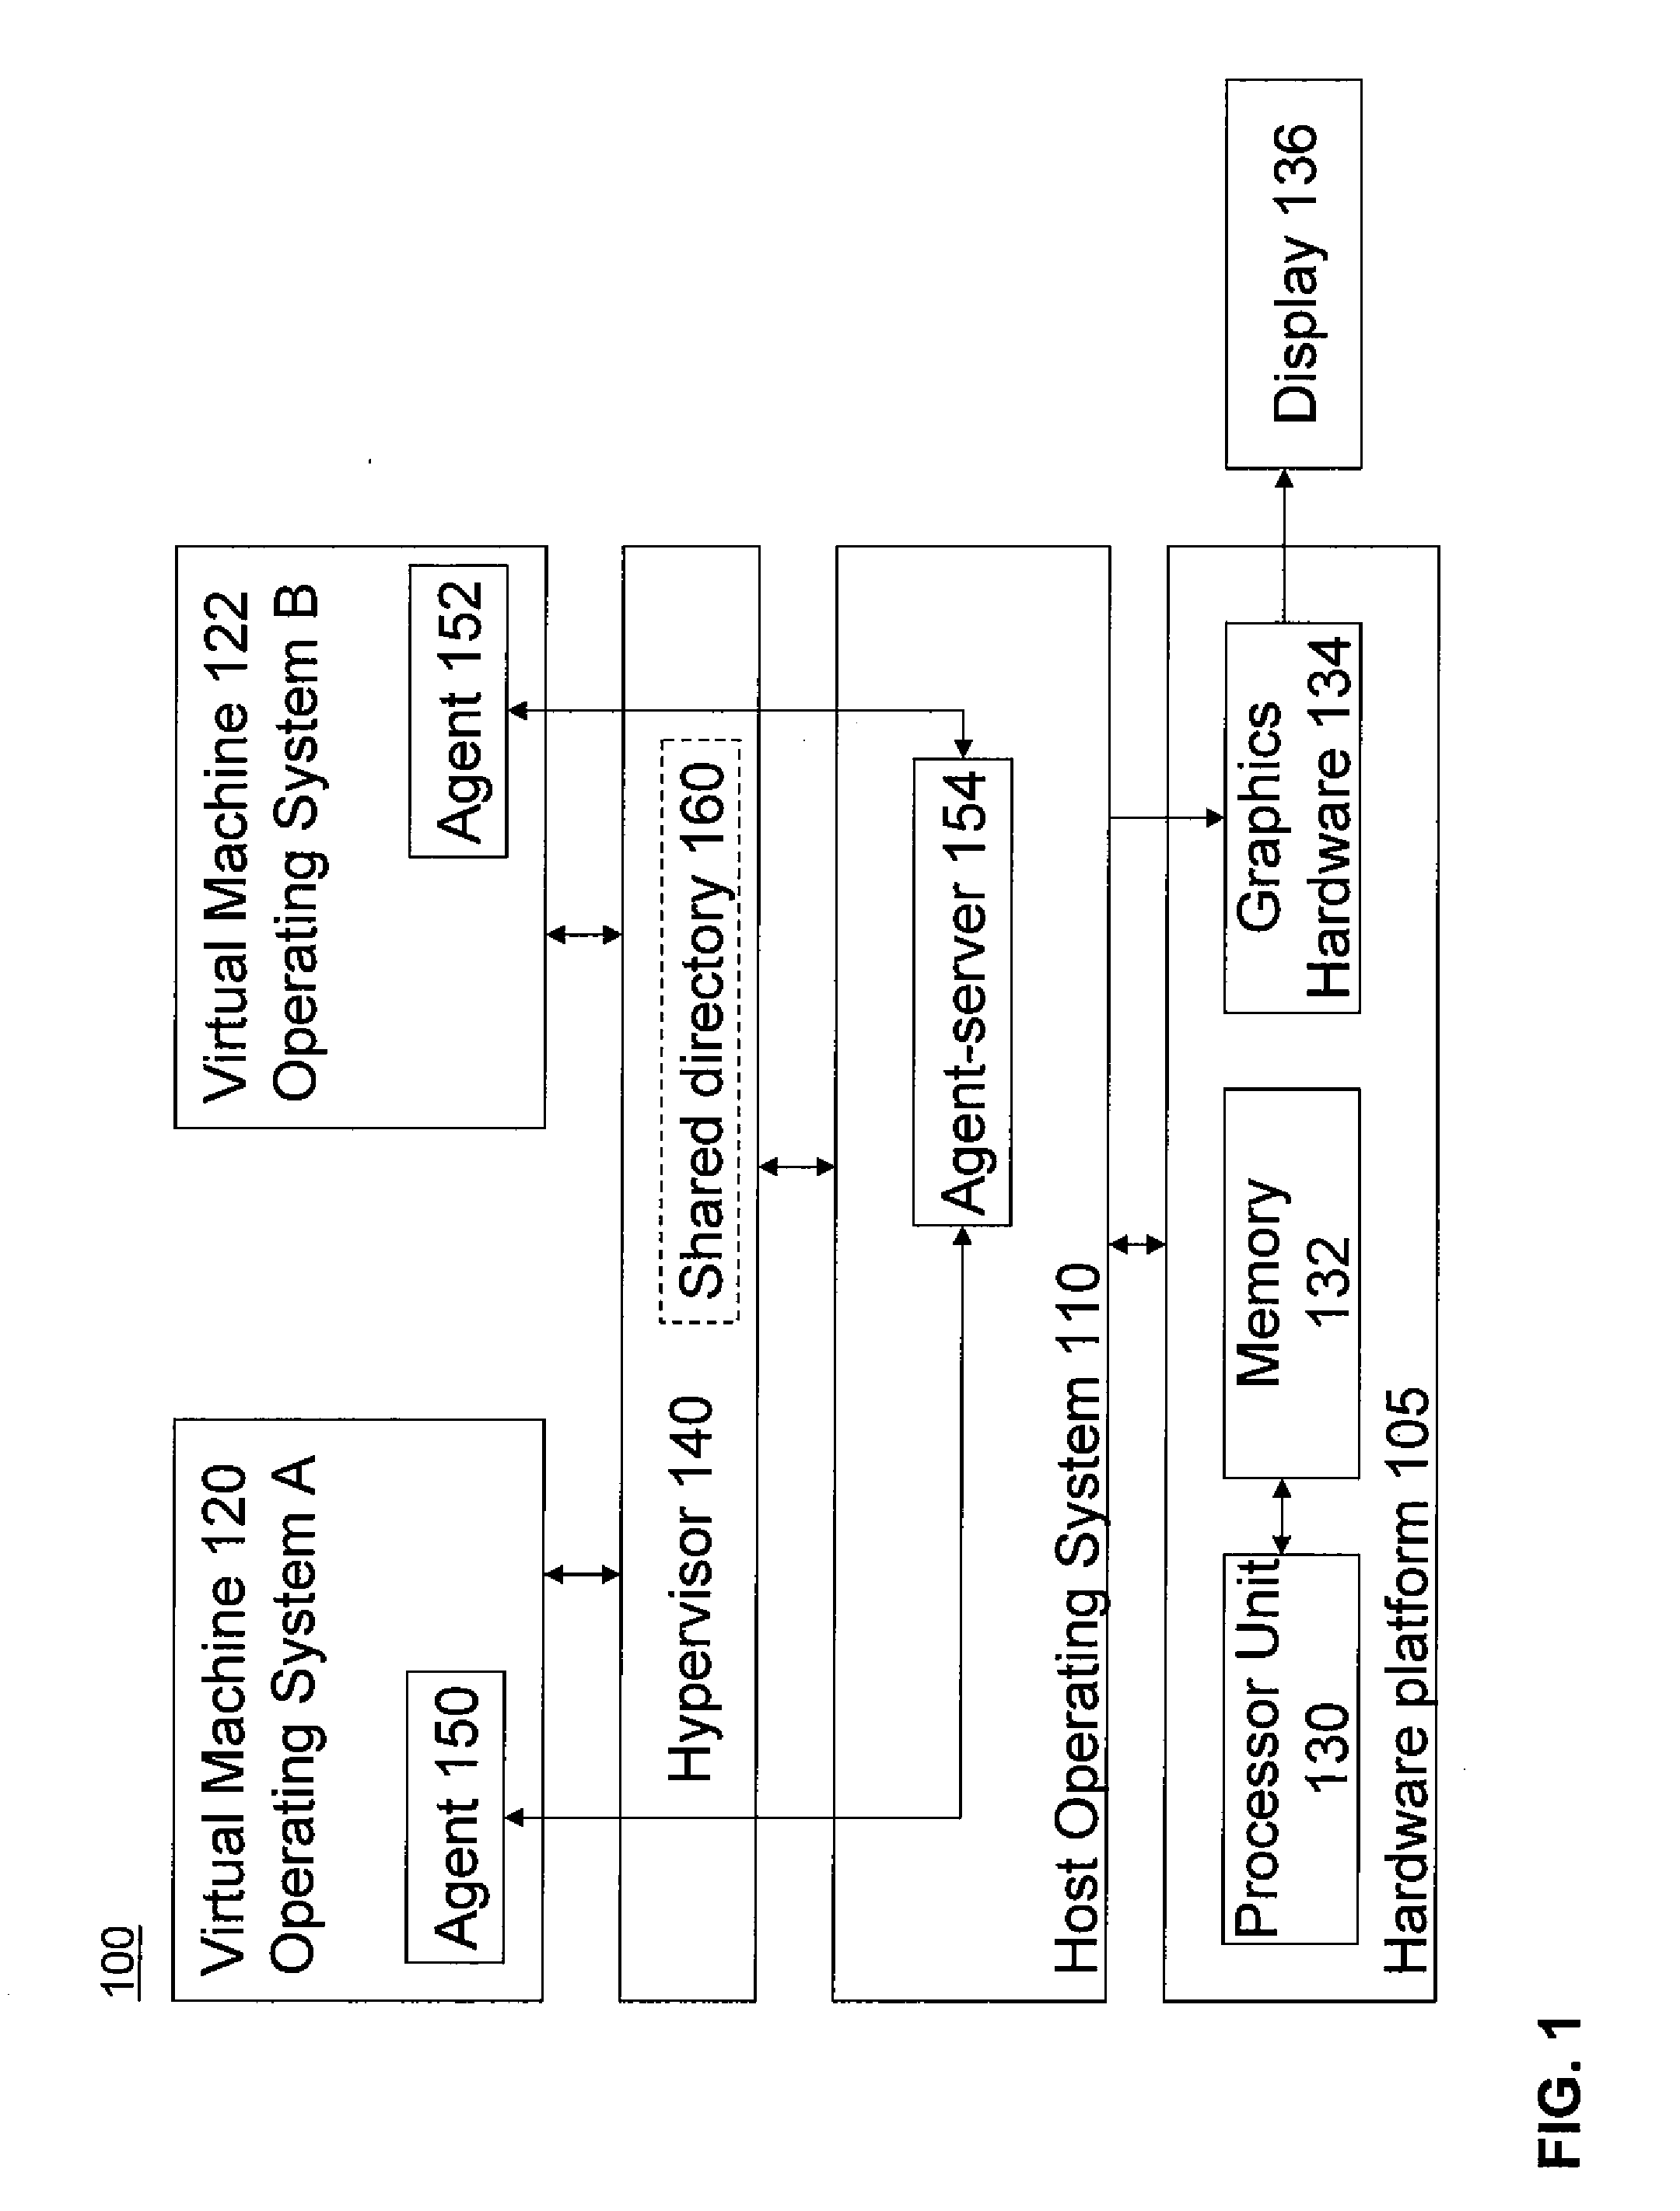 Systems, methods and computer readable media for managing multiple virtual machines